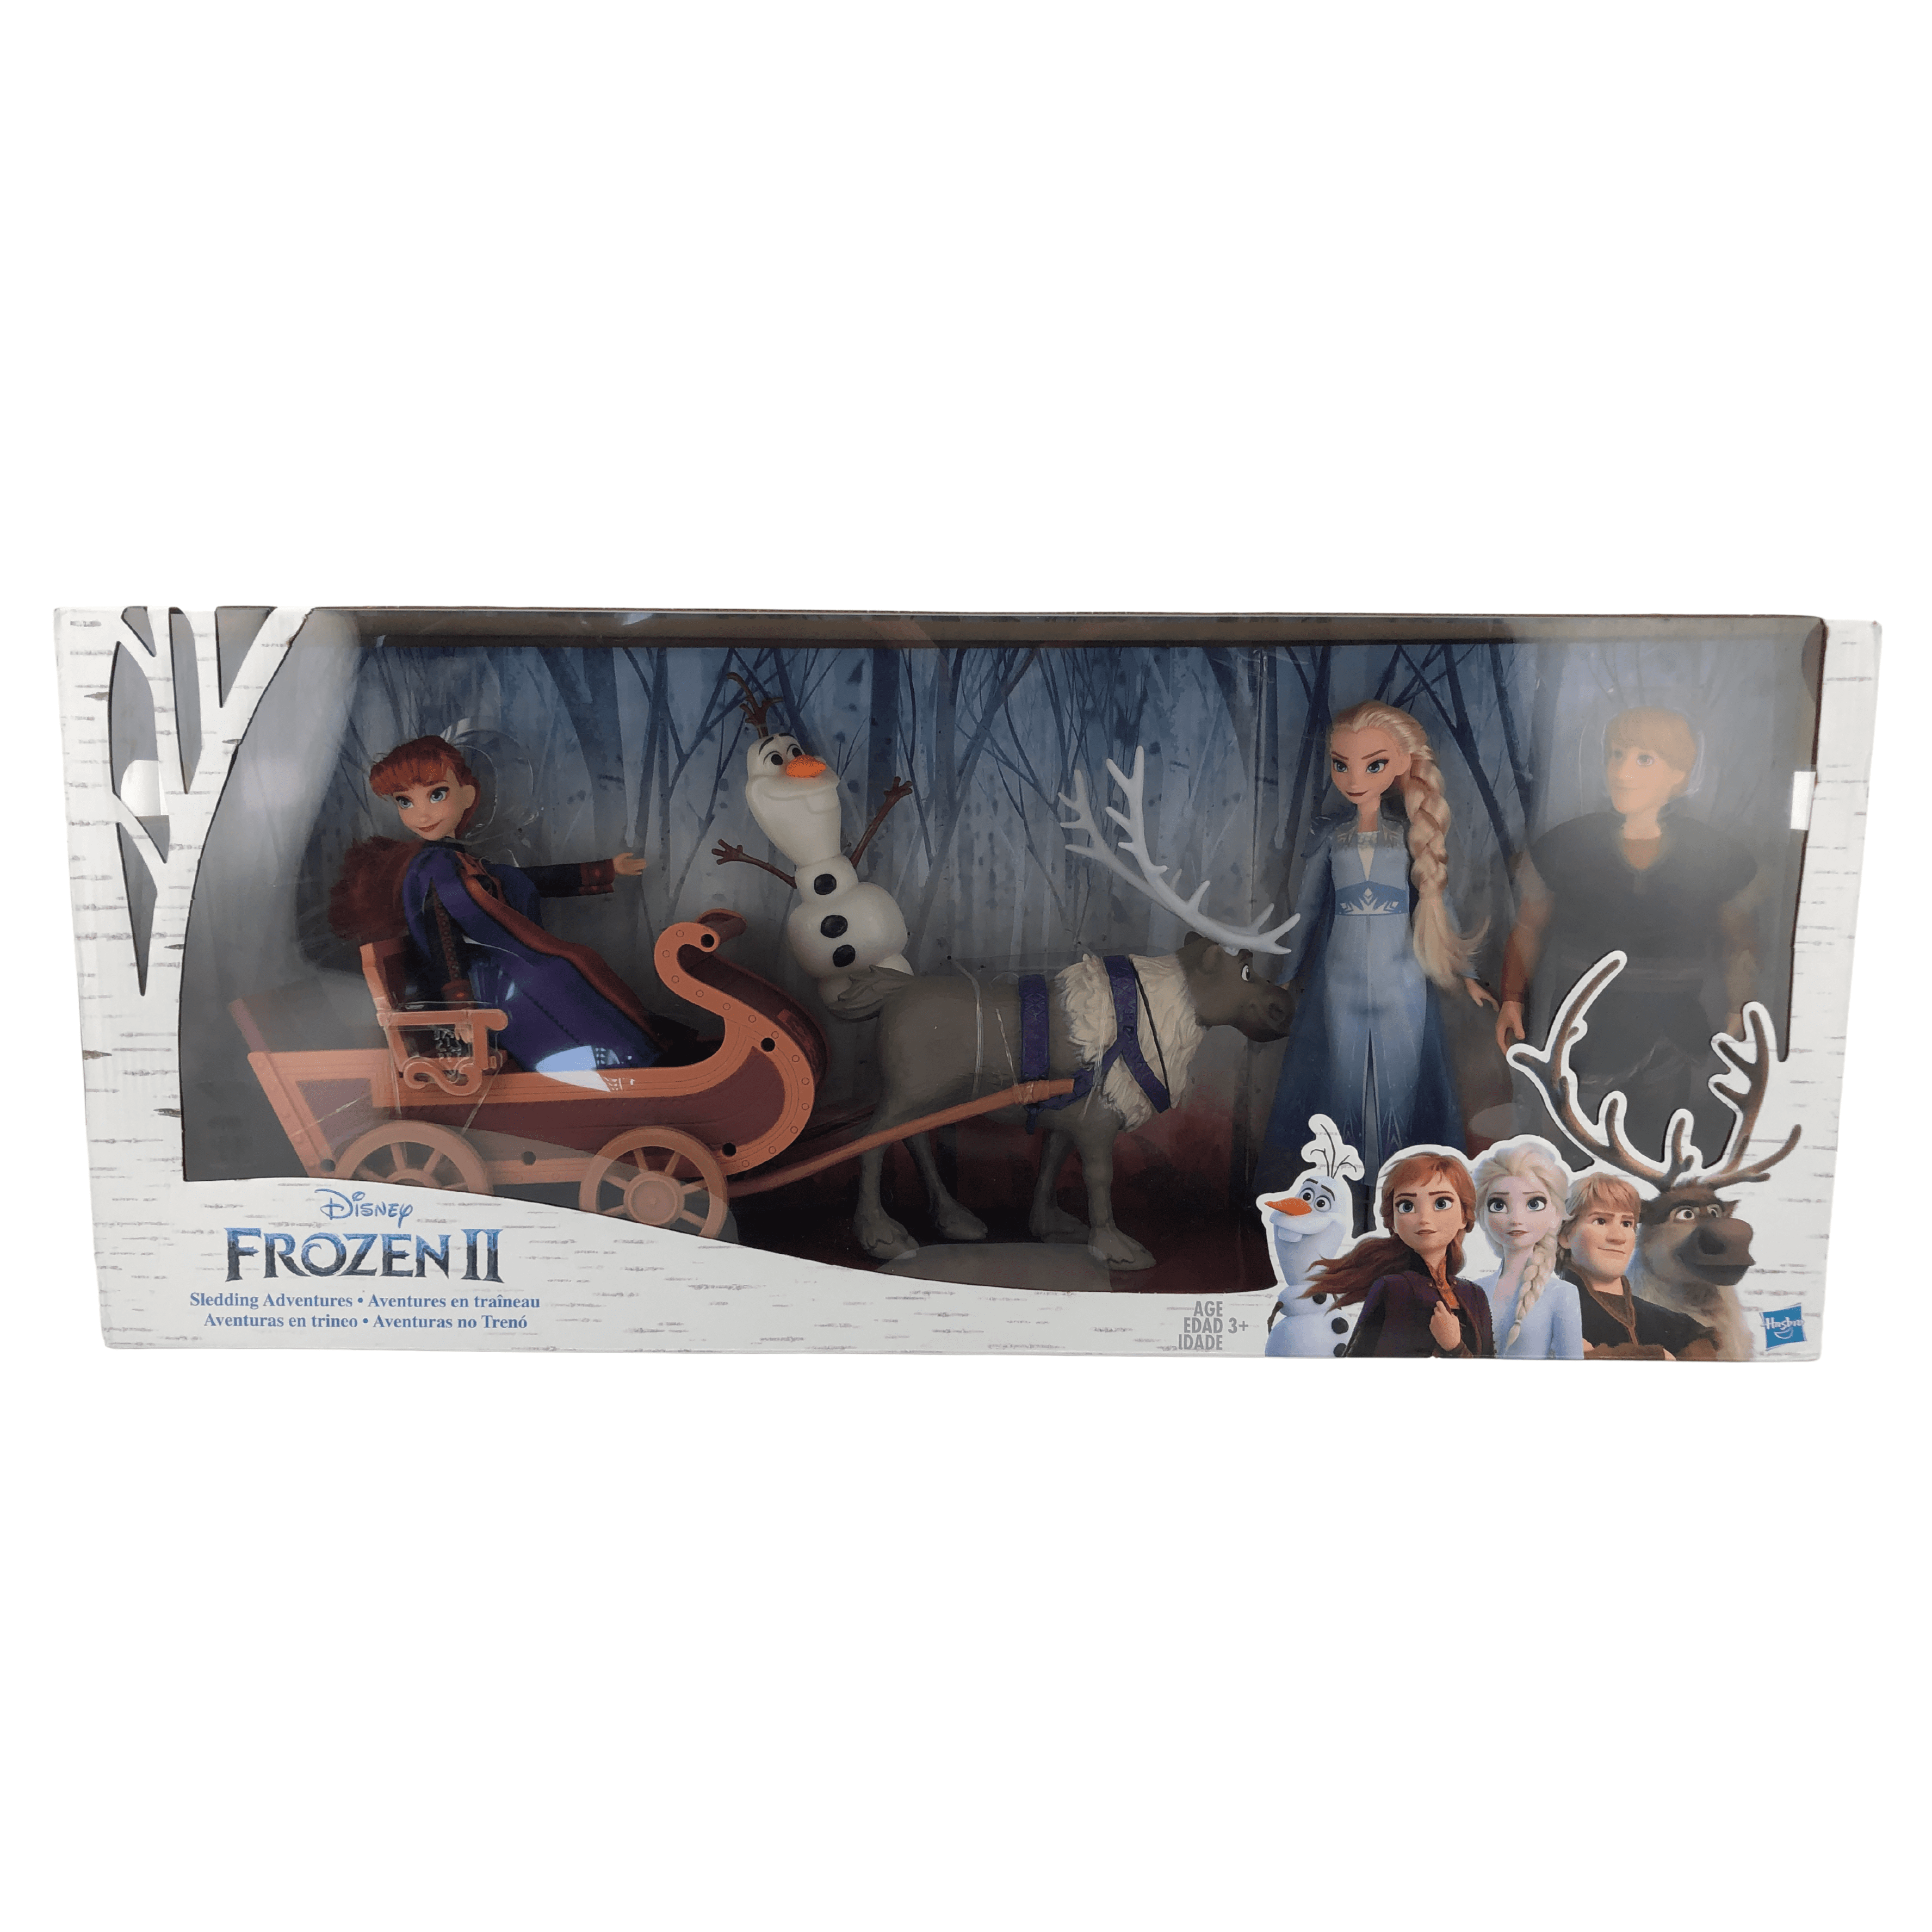 Frozen 2 Sledding playset with 5 figures including Anna, Elsa, Kristsoff, Sven, and Olaf. Deals